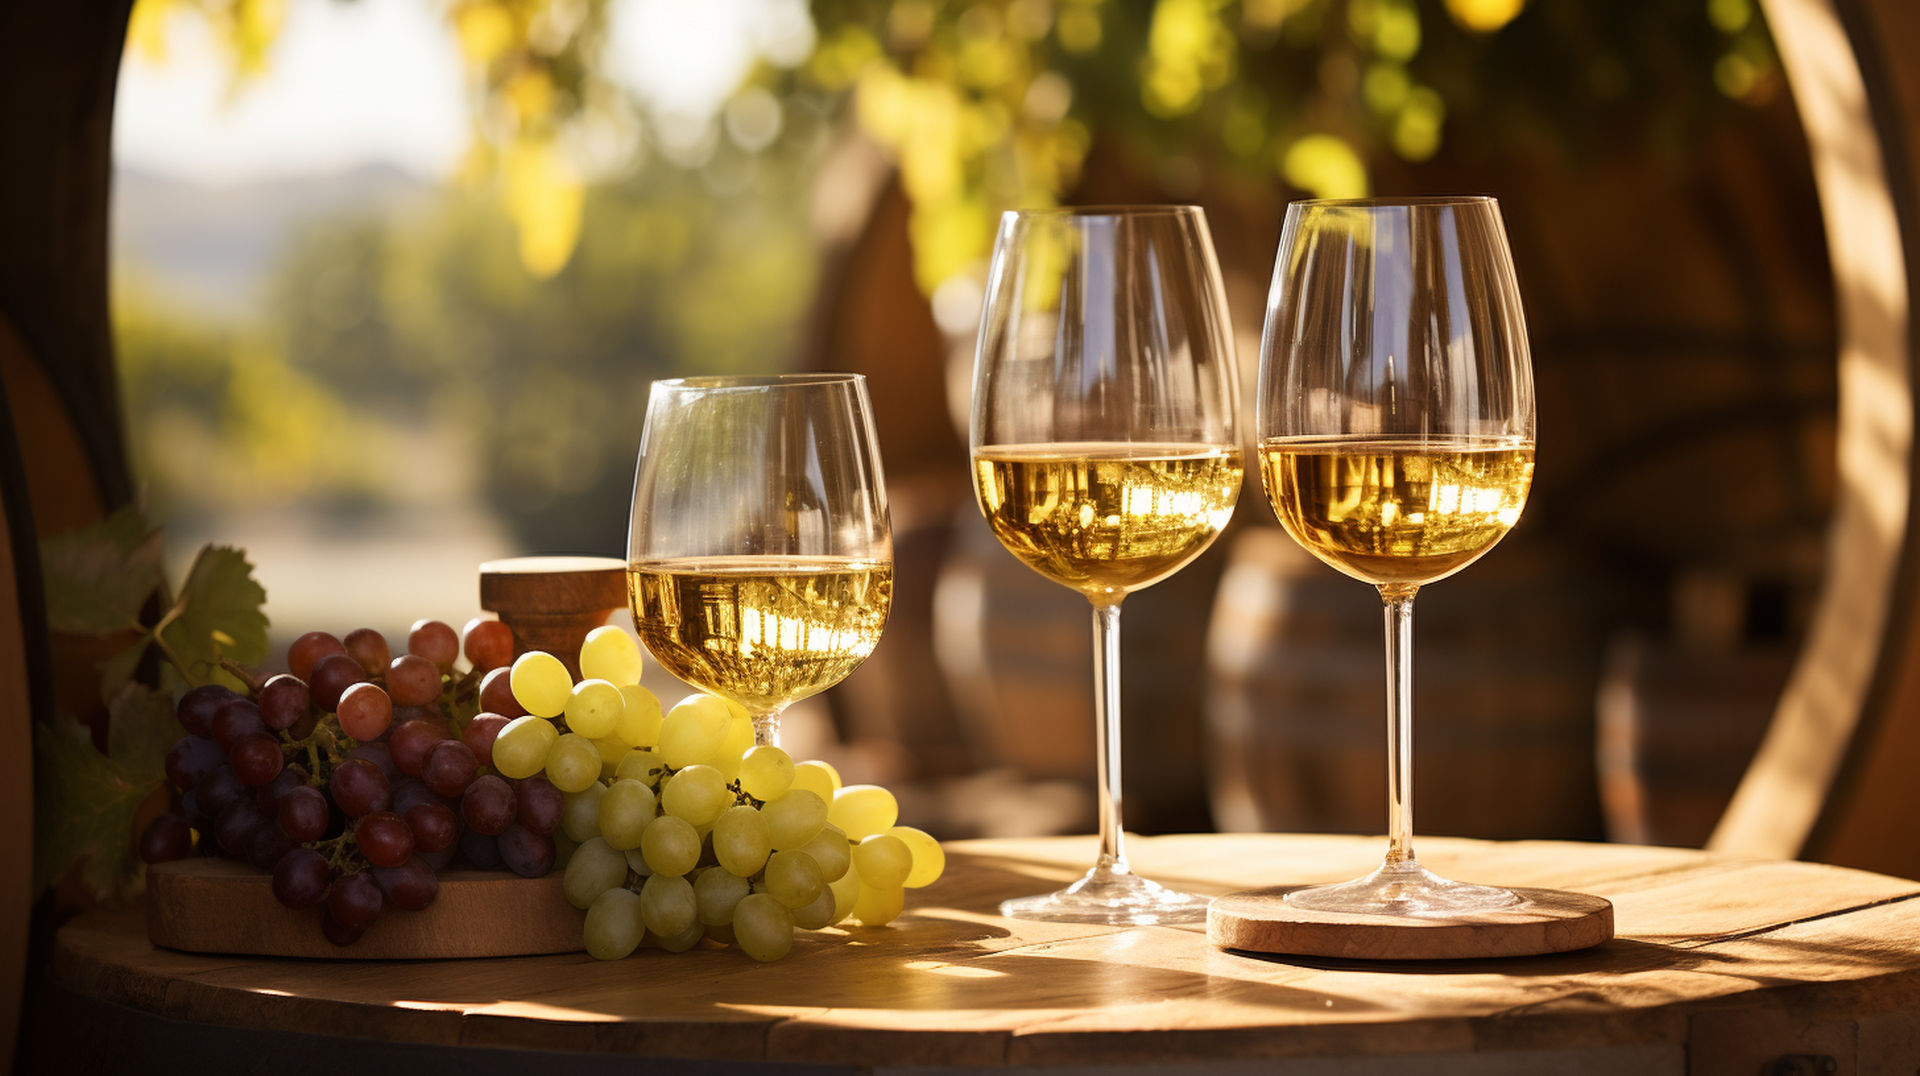 Showcase a variety of Chardonnay wine glasses with differing shades of gold, against a rustic vineyard backdrop, with a wooden barrel and an assortment of grapes in the foreground